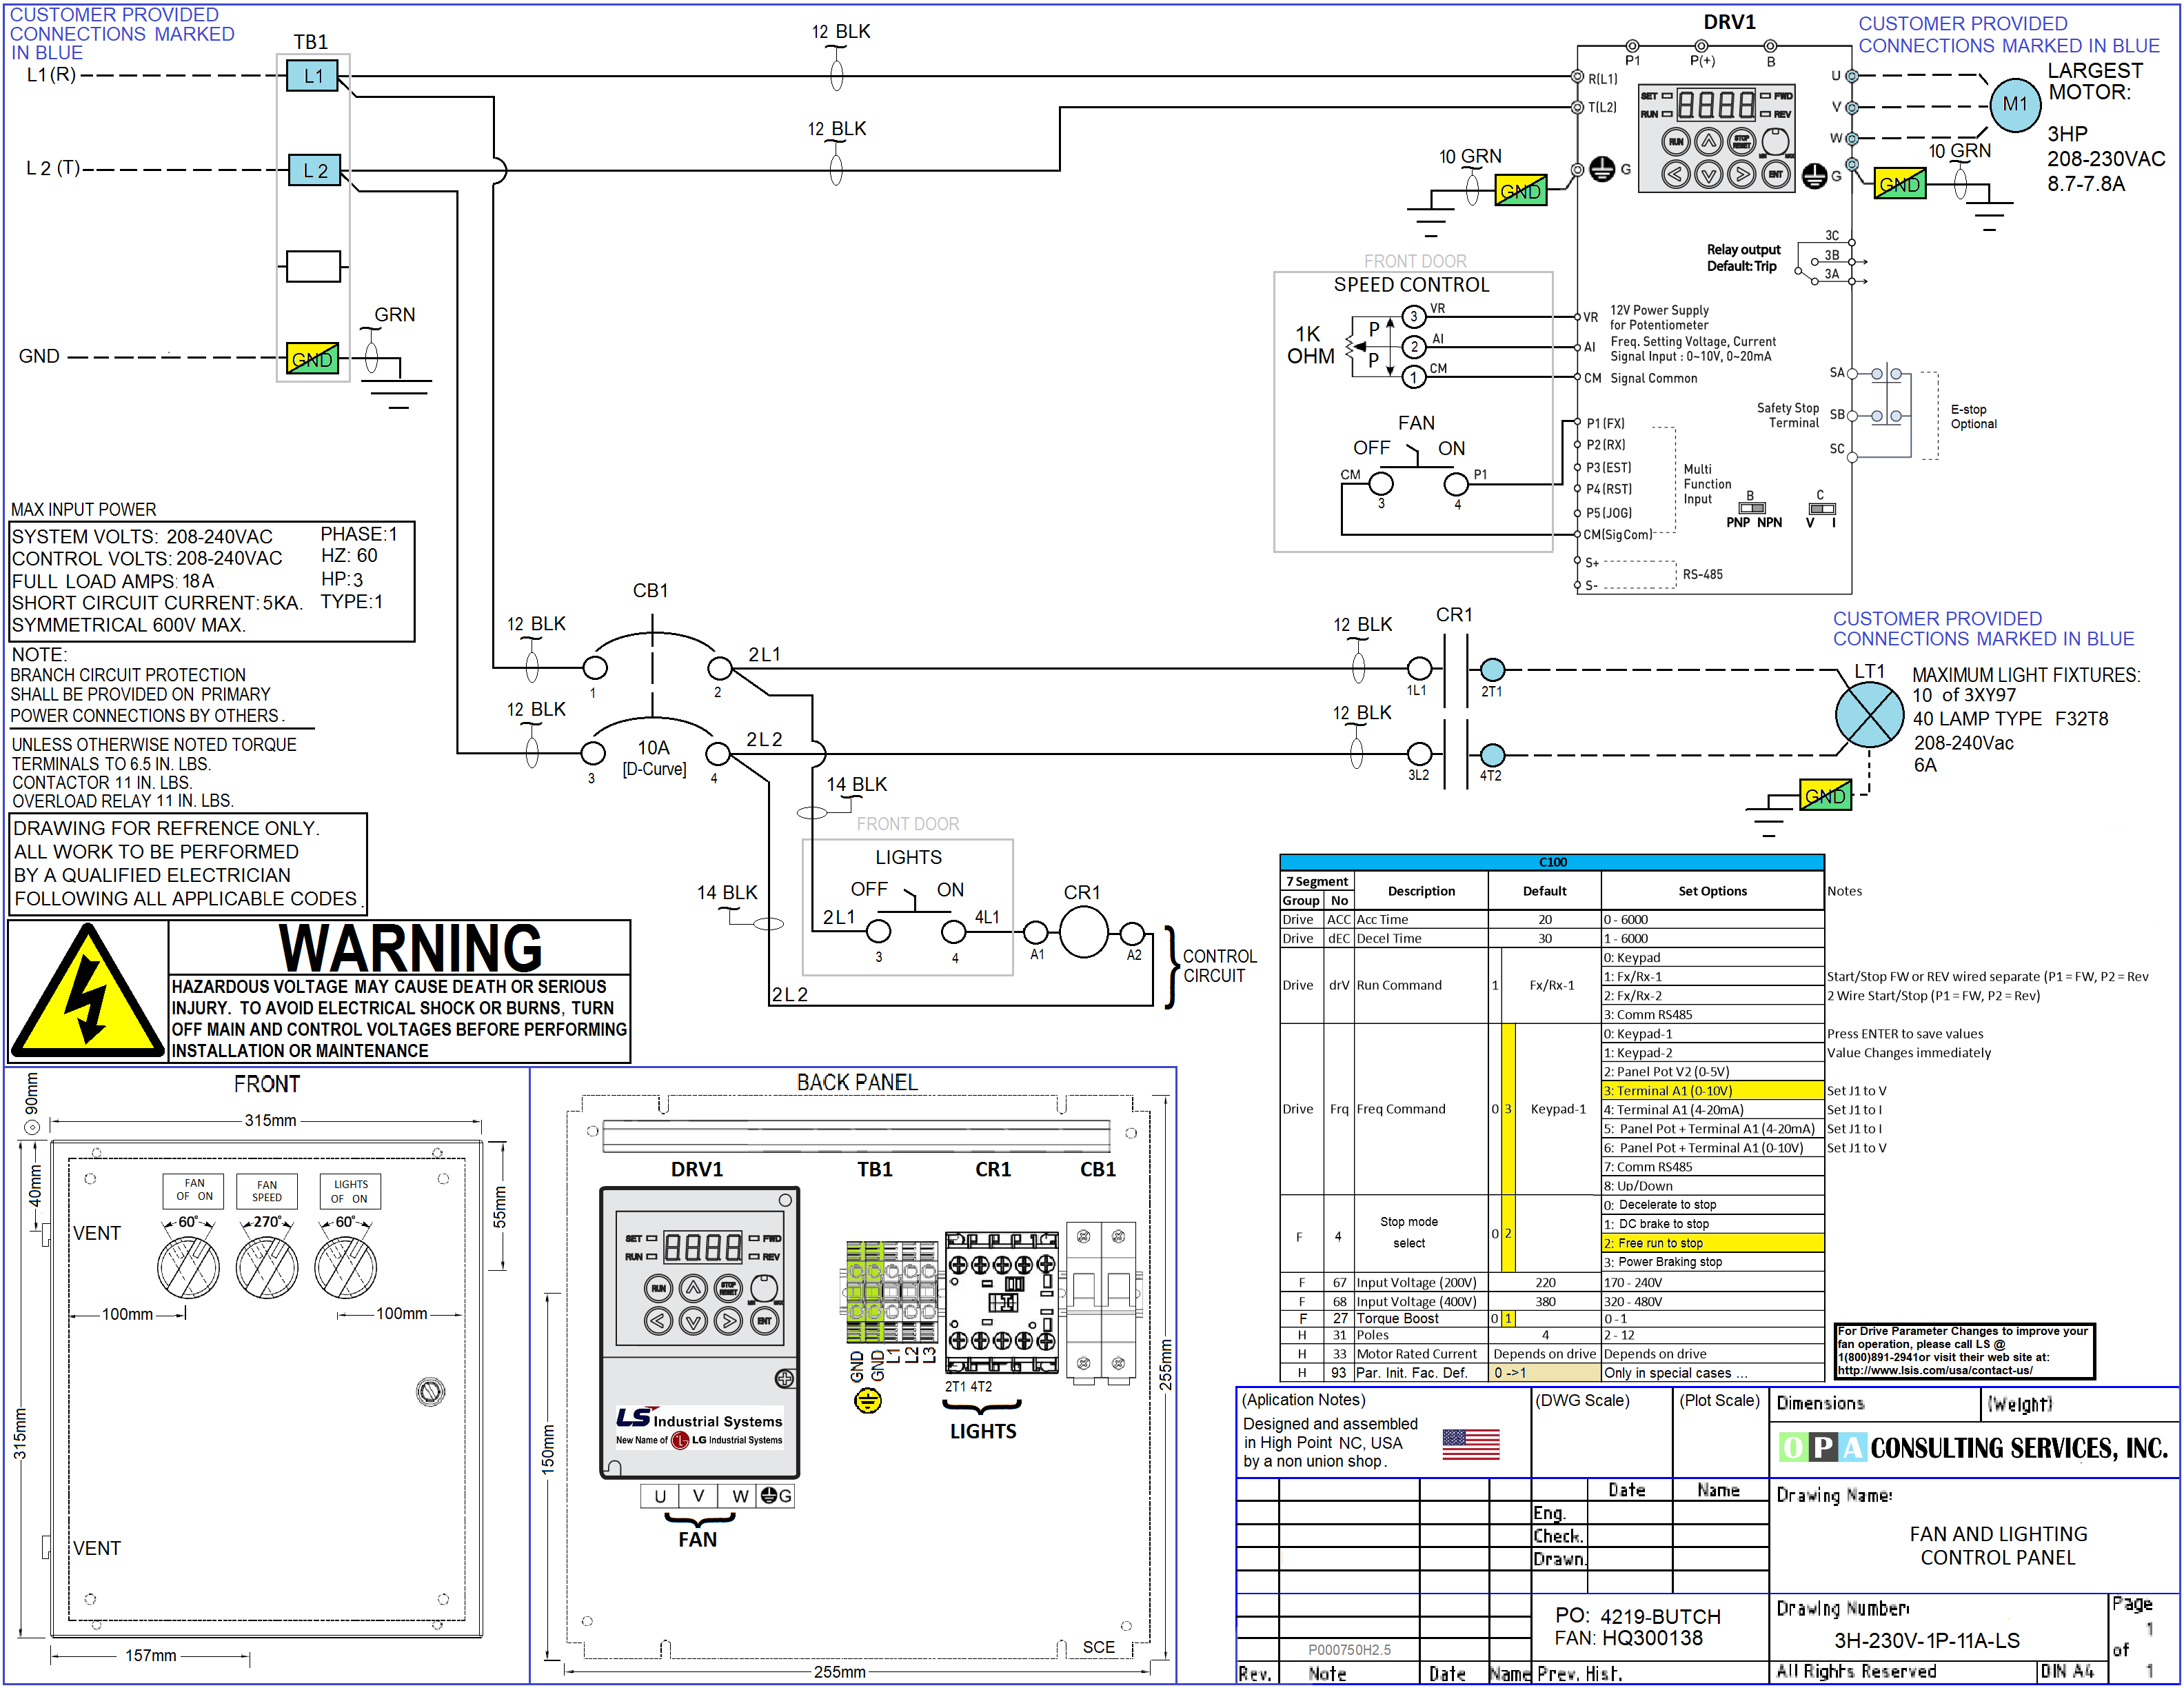 Paint Booth VFD Control Panel Drawing ... Free to Download